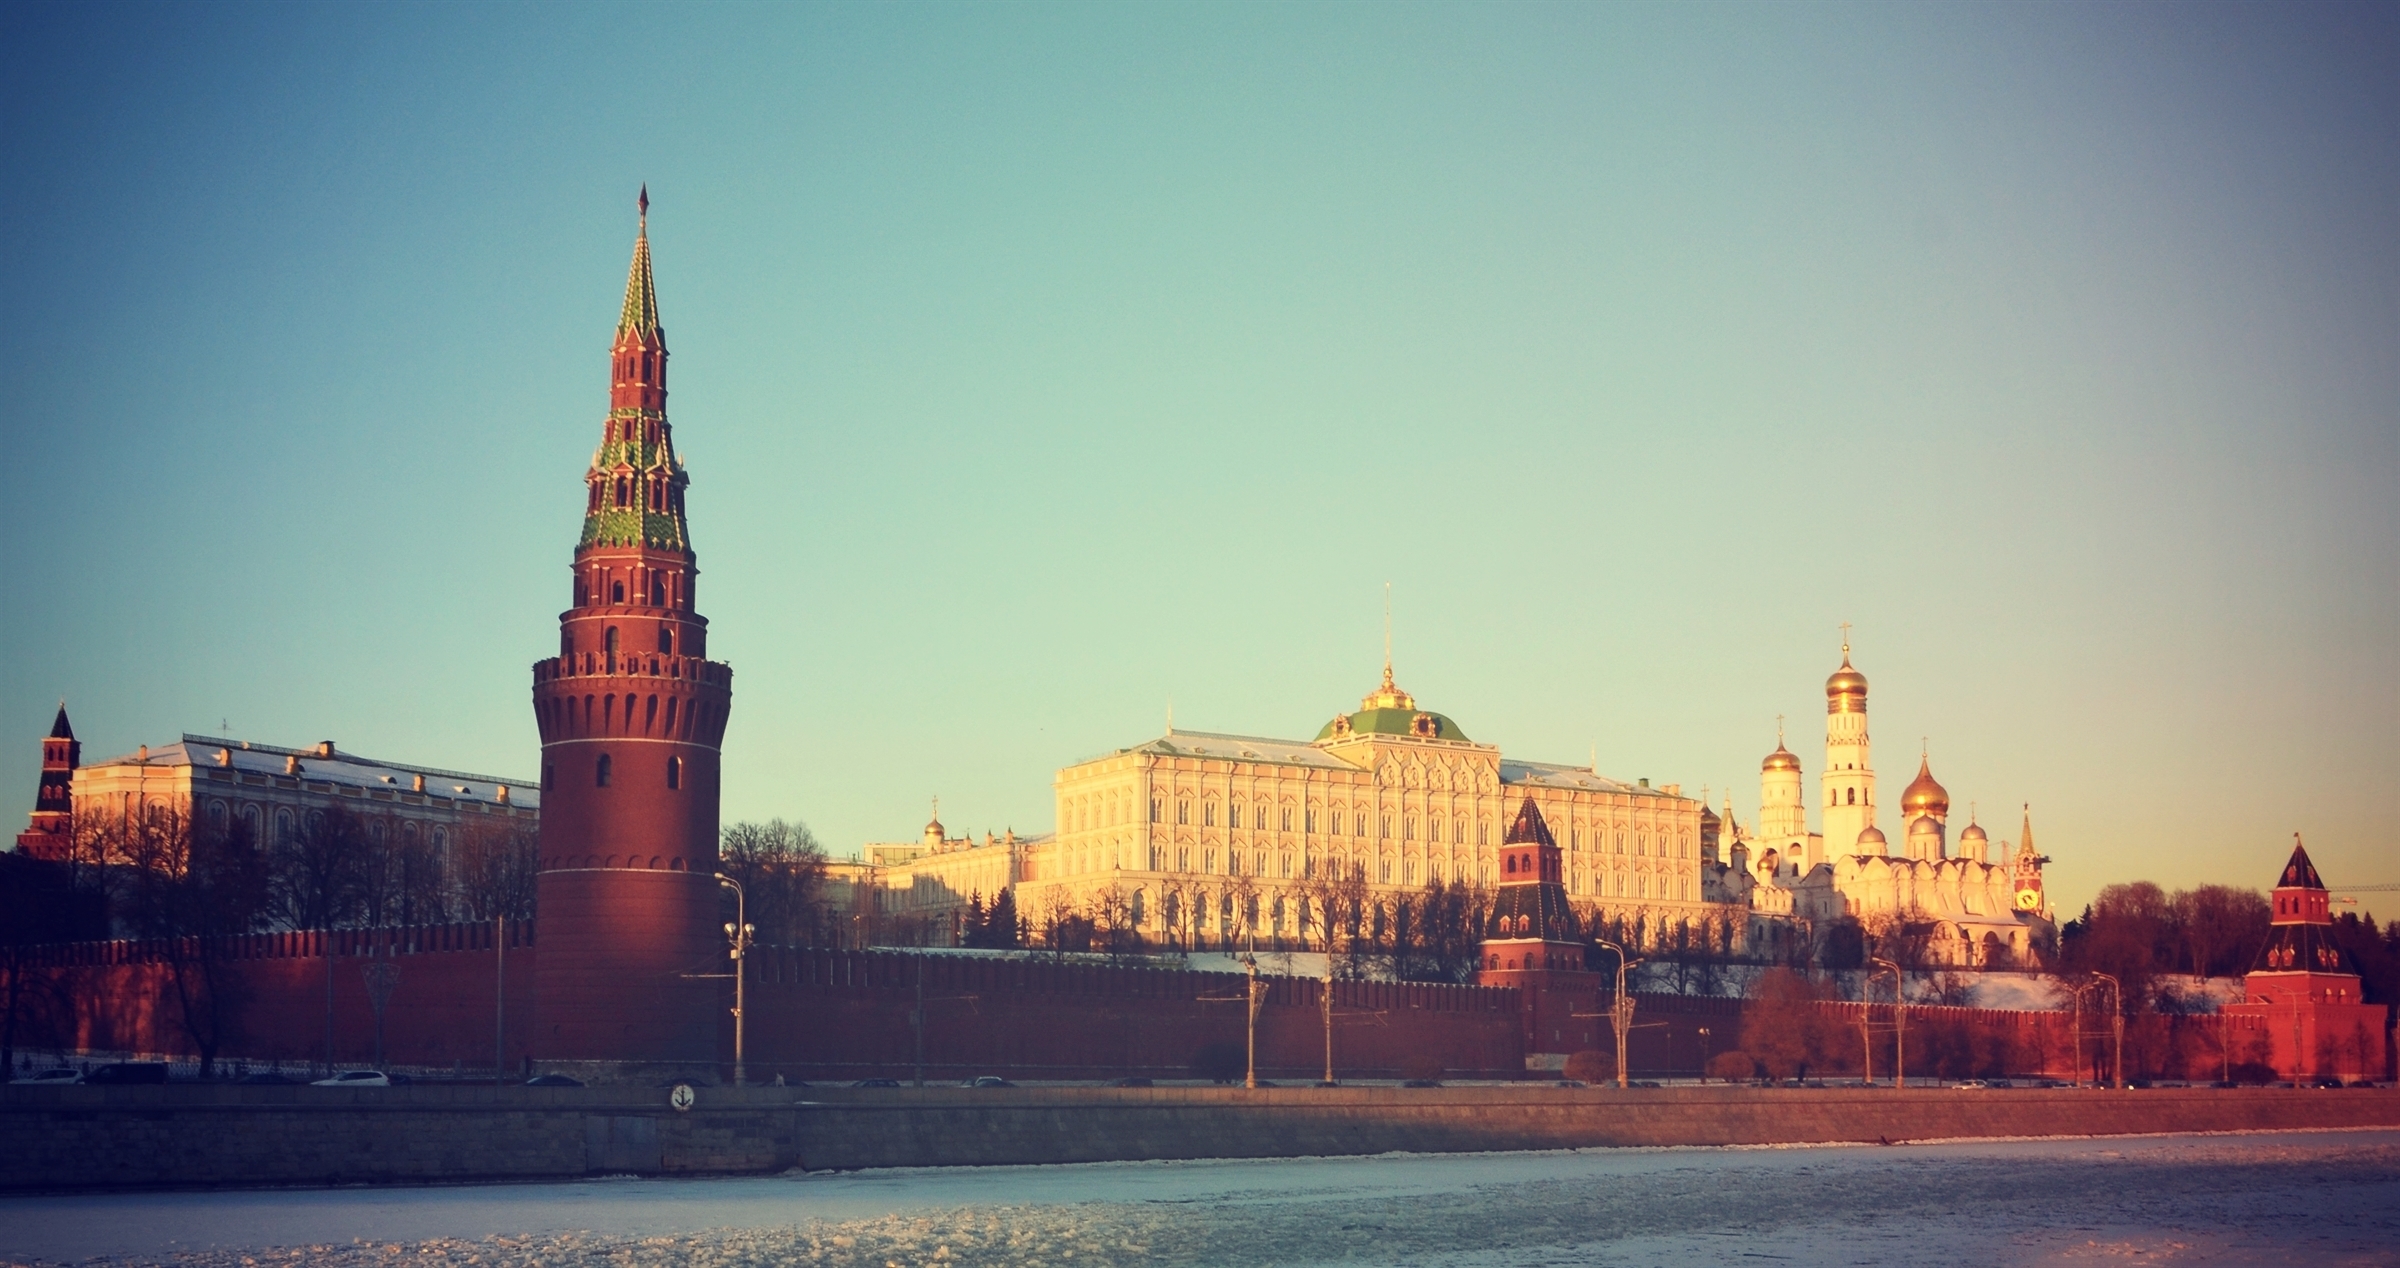 Image: Moscow, Russia, Red square, Kremlin, landmark